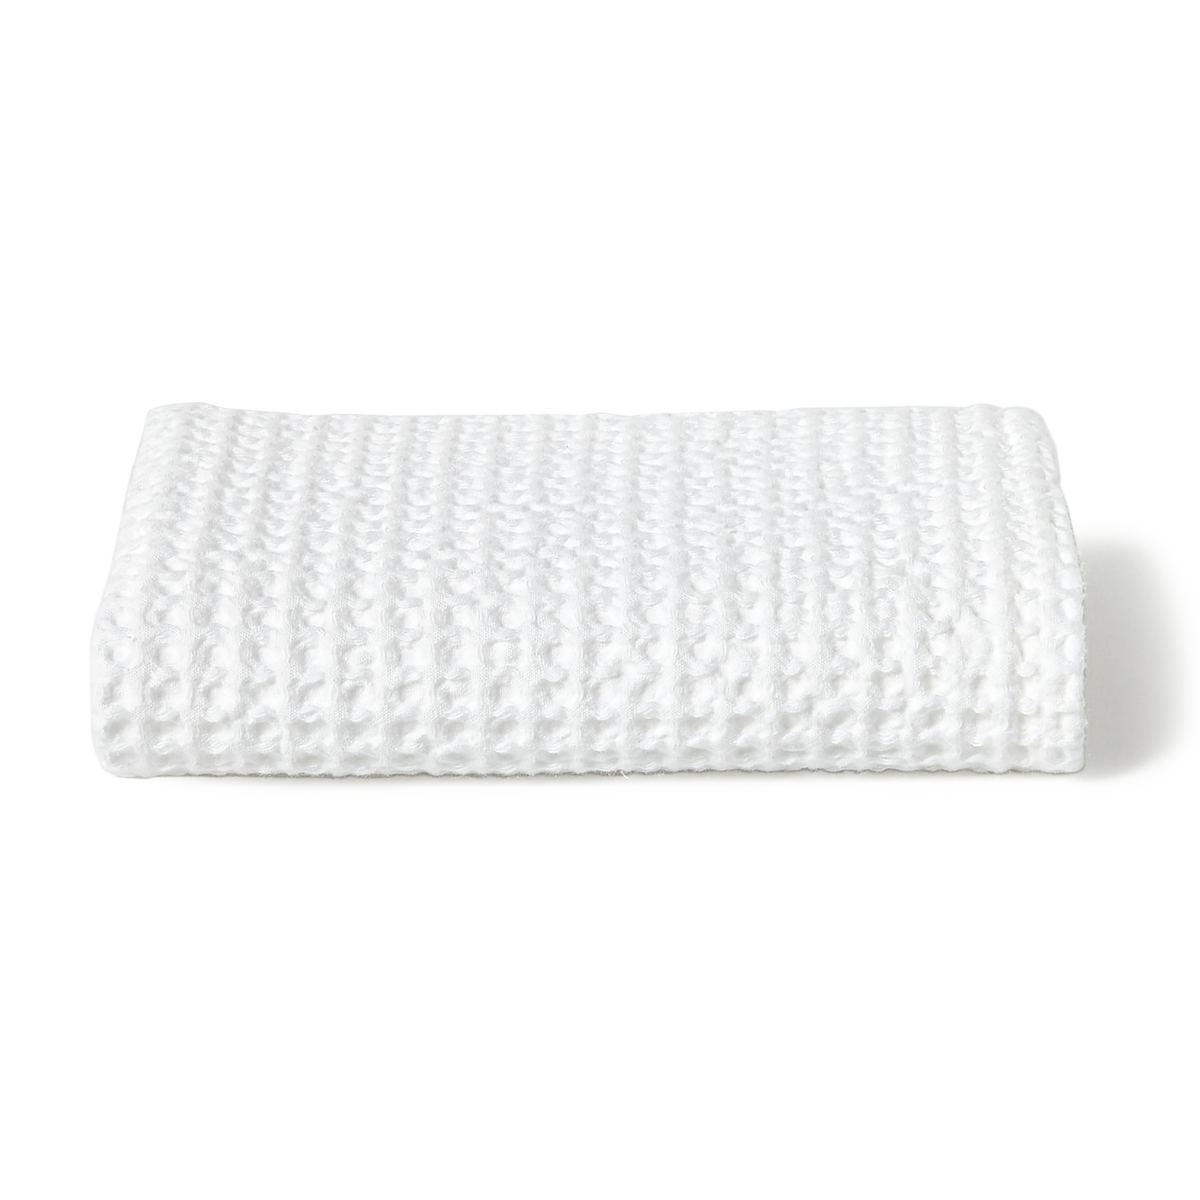 Made in Portugal from 100% cotton, the Stone Washed towel features a loomed waffle knit texture that is absorbent, quick to dry, and resistant to shrinkage.